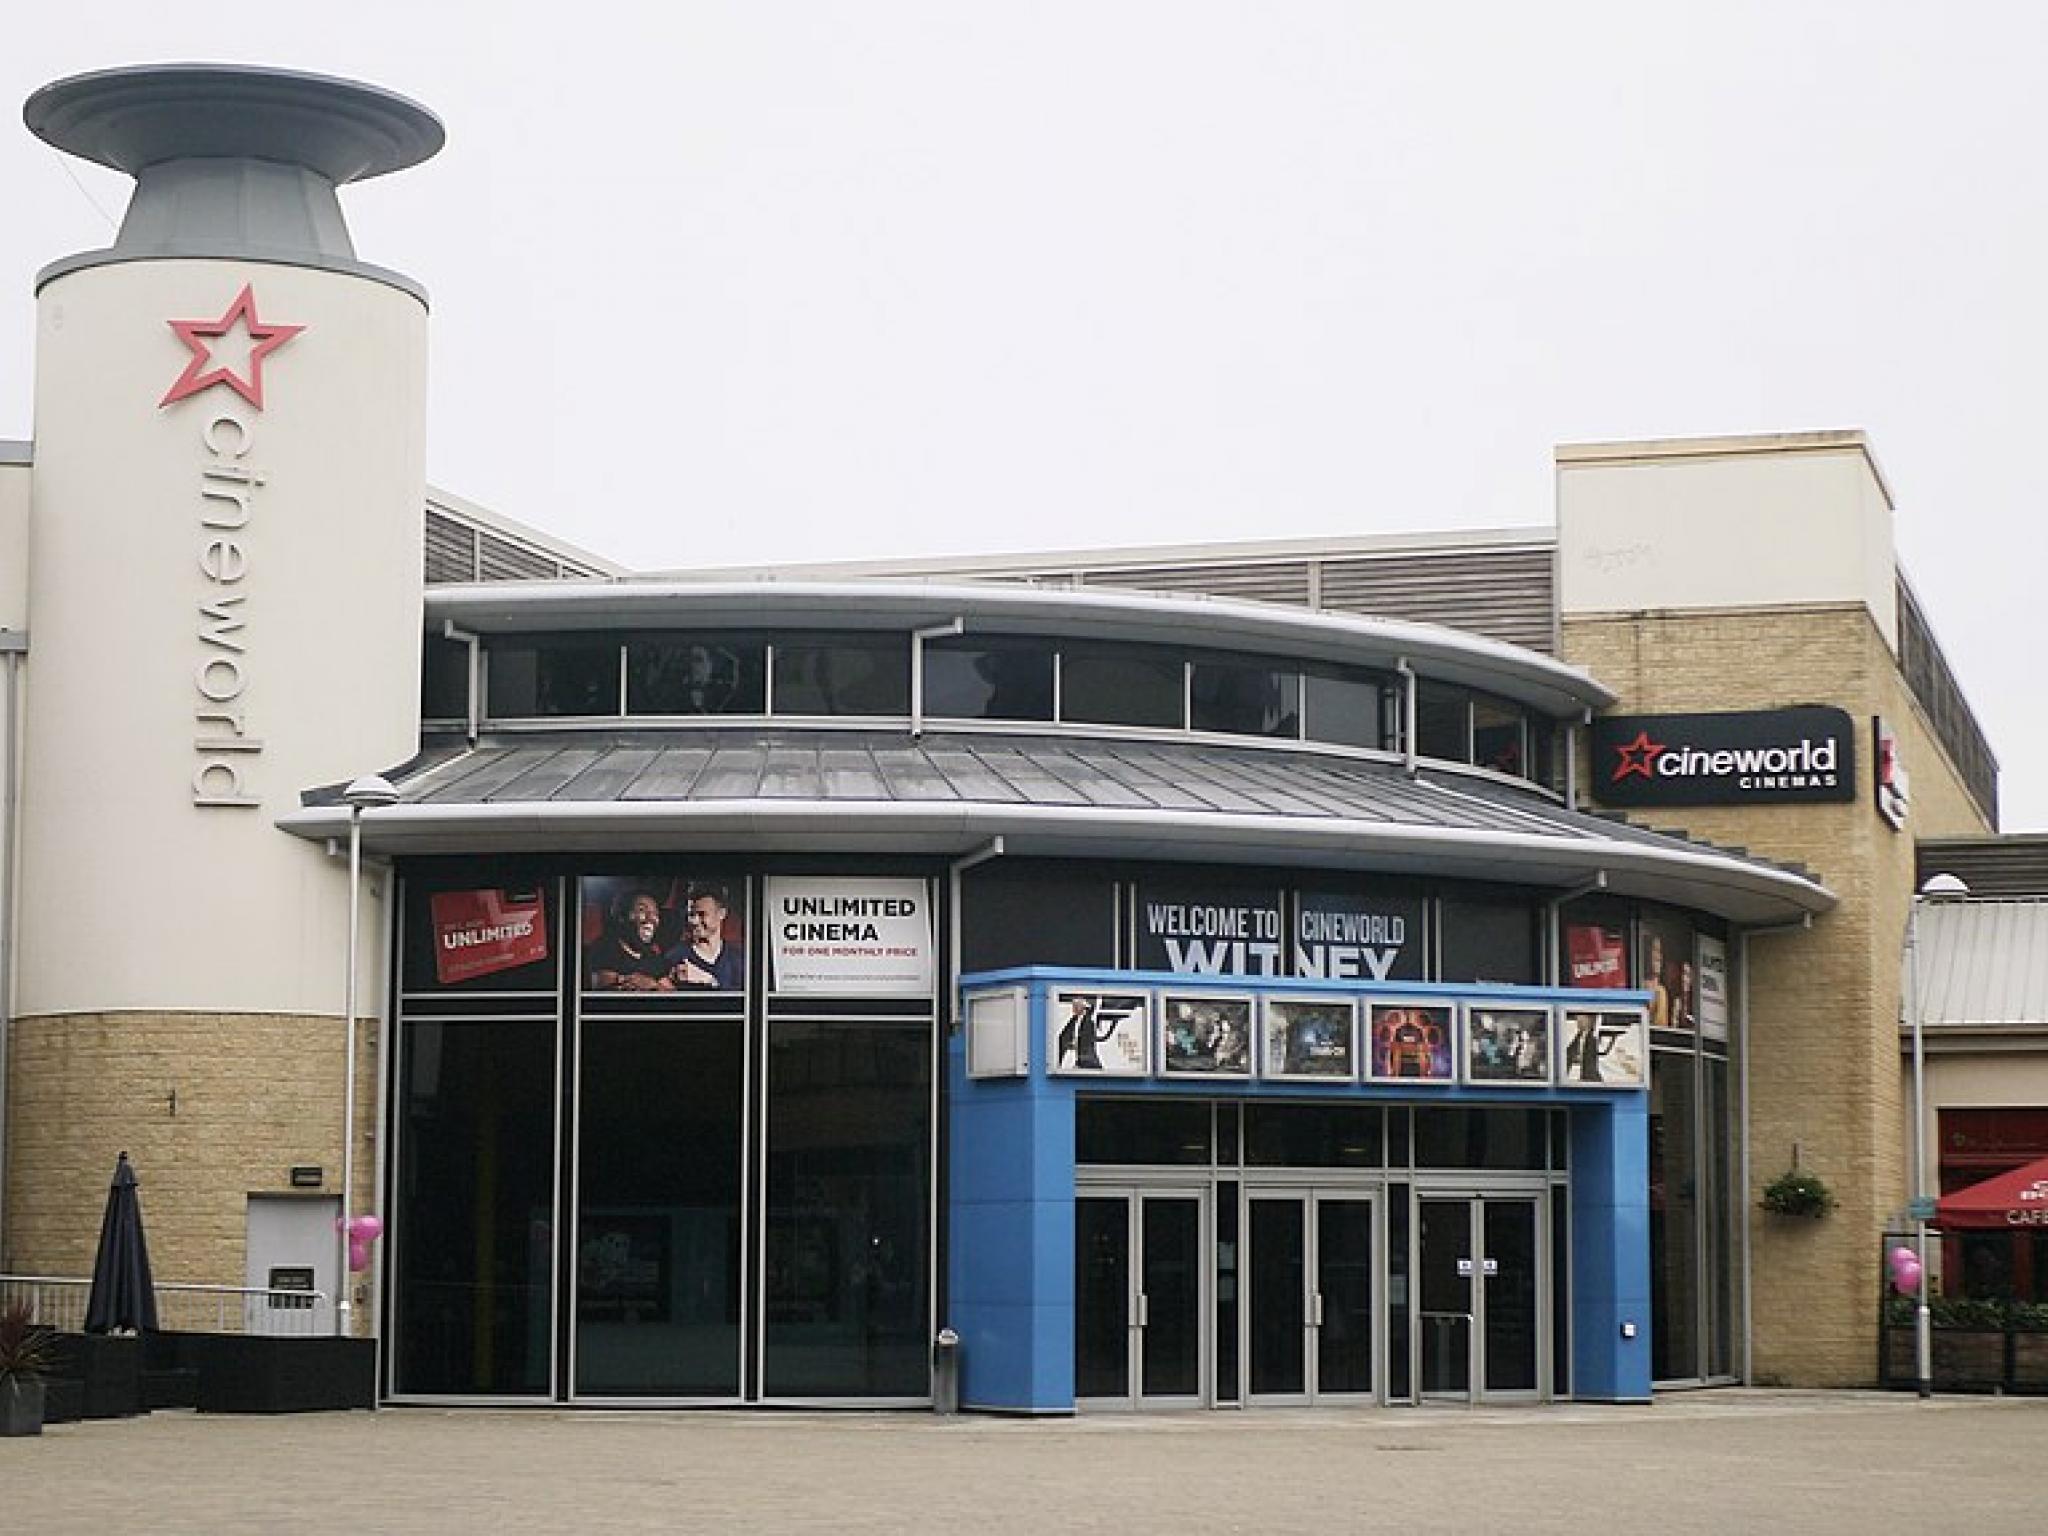  amc-britain-rival-cineworld-files-restructuring-plan-in-bankruptcy-court-shareholders-to-be-wiped-out 